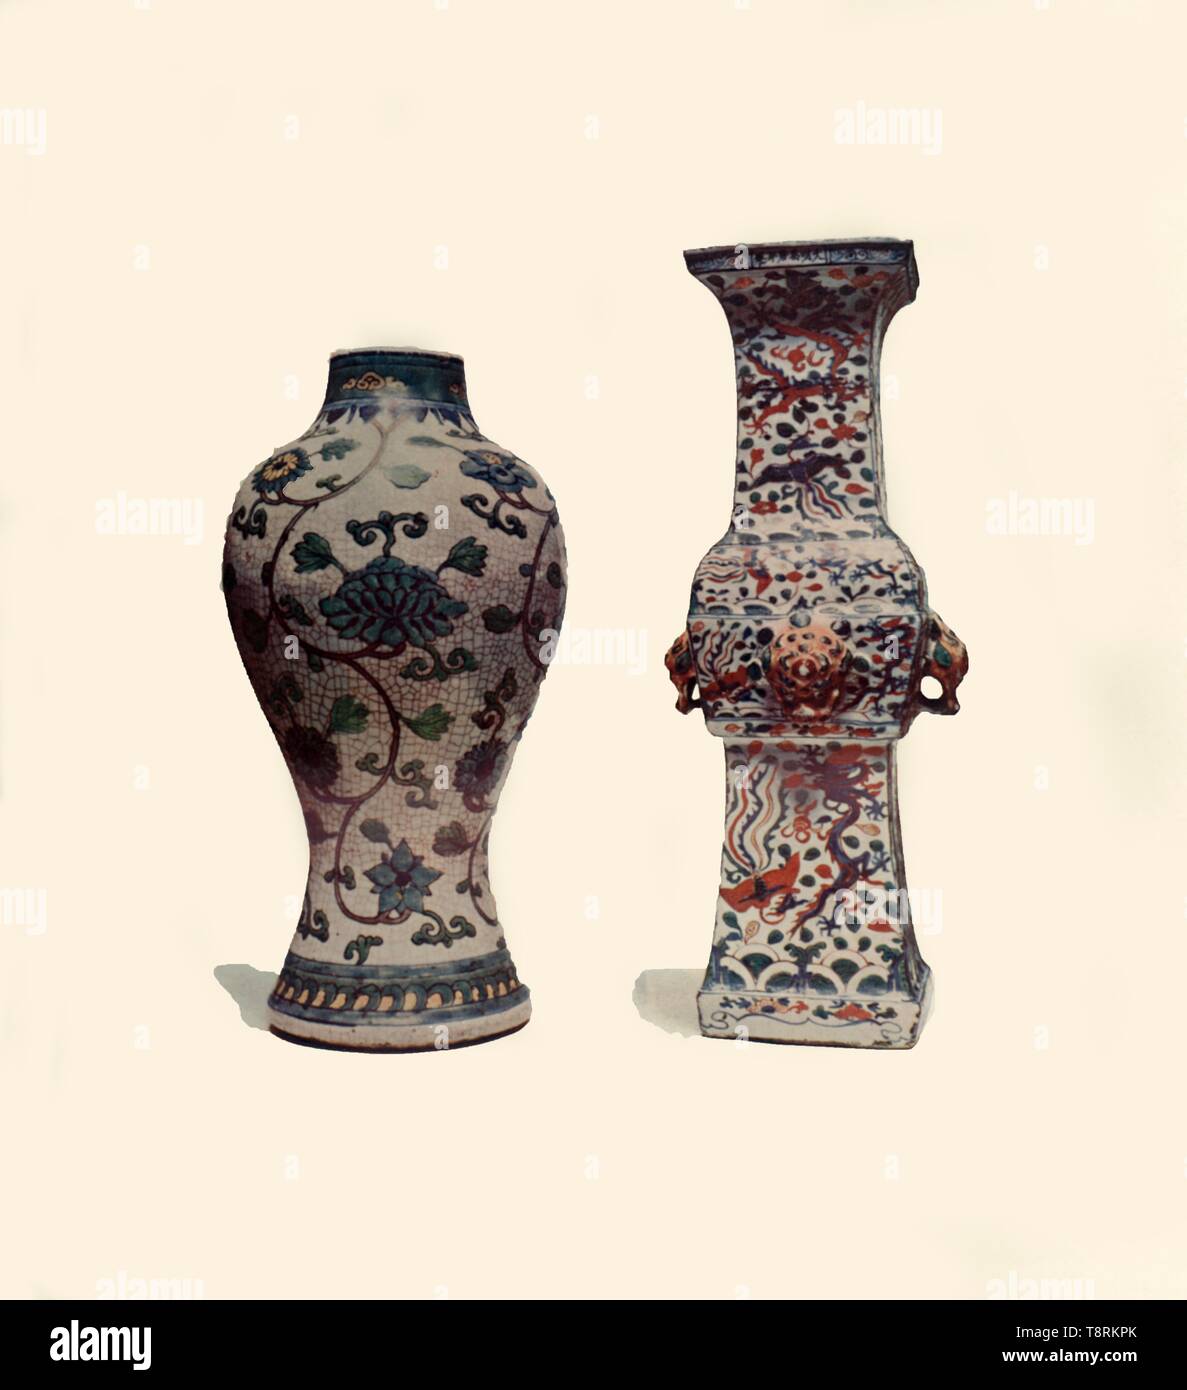 Two enamelled porcelain vases, Chinese, 15th-17th centuries, (1908).  Creator: Unknown. Stock Photo